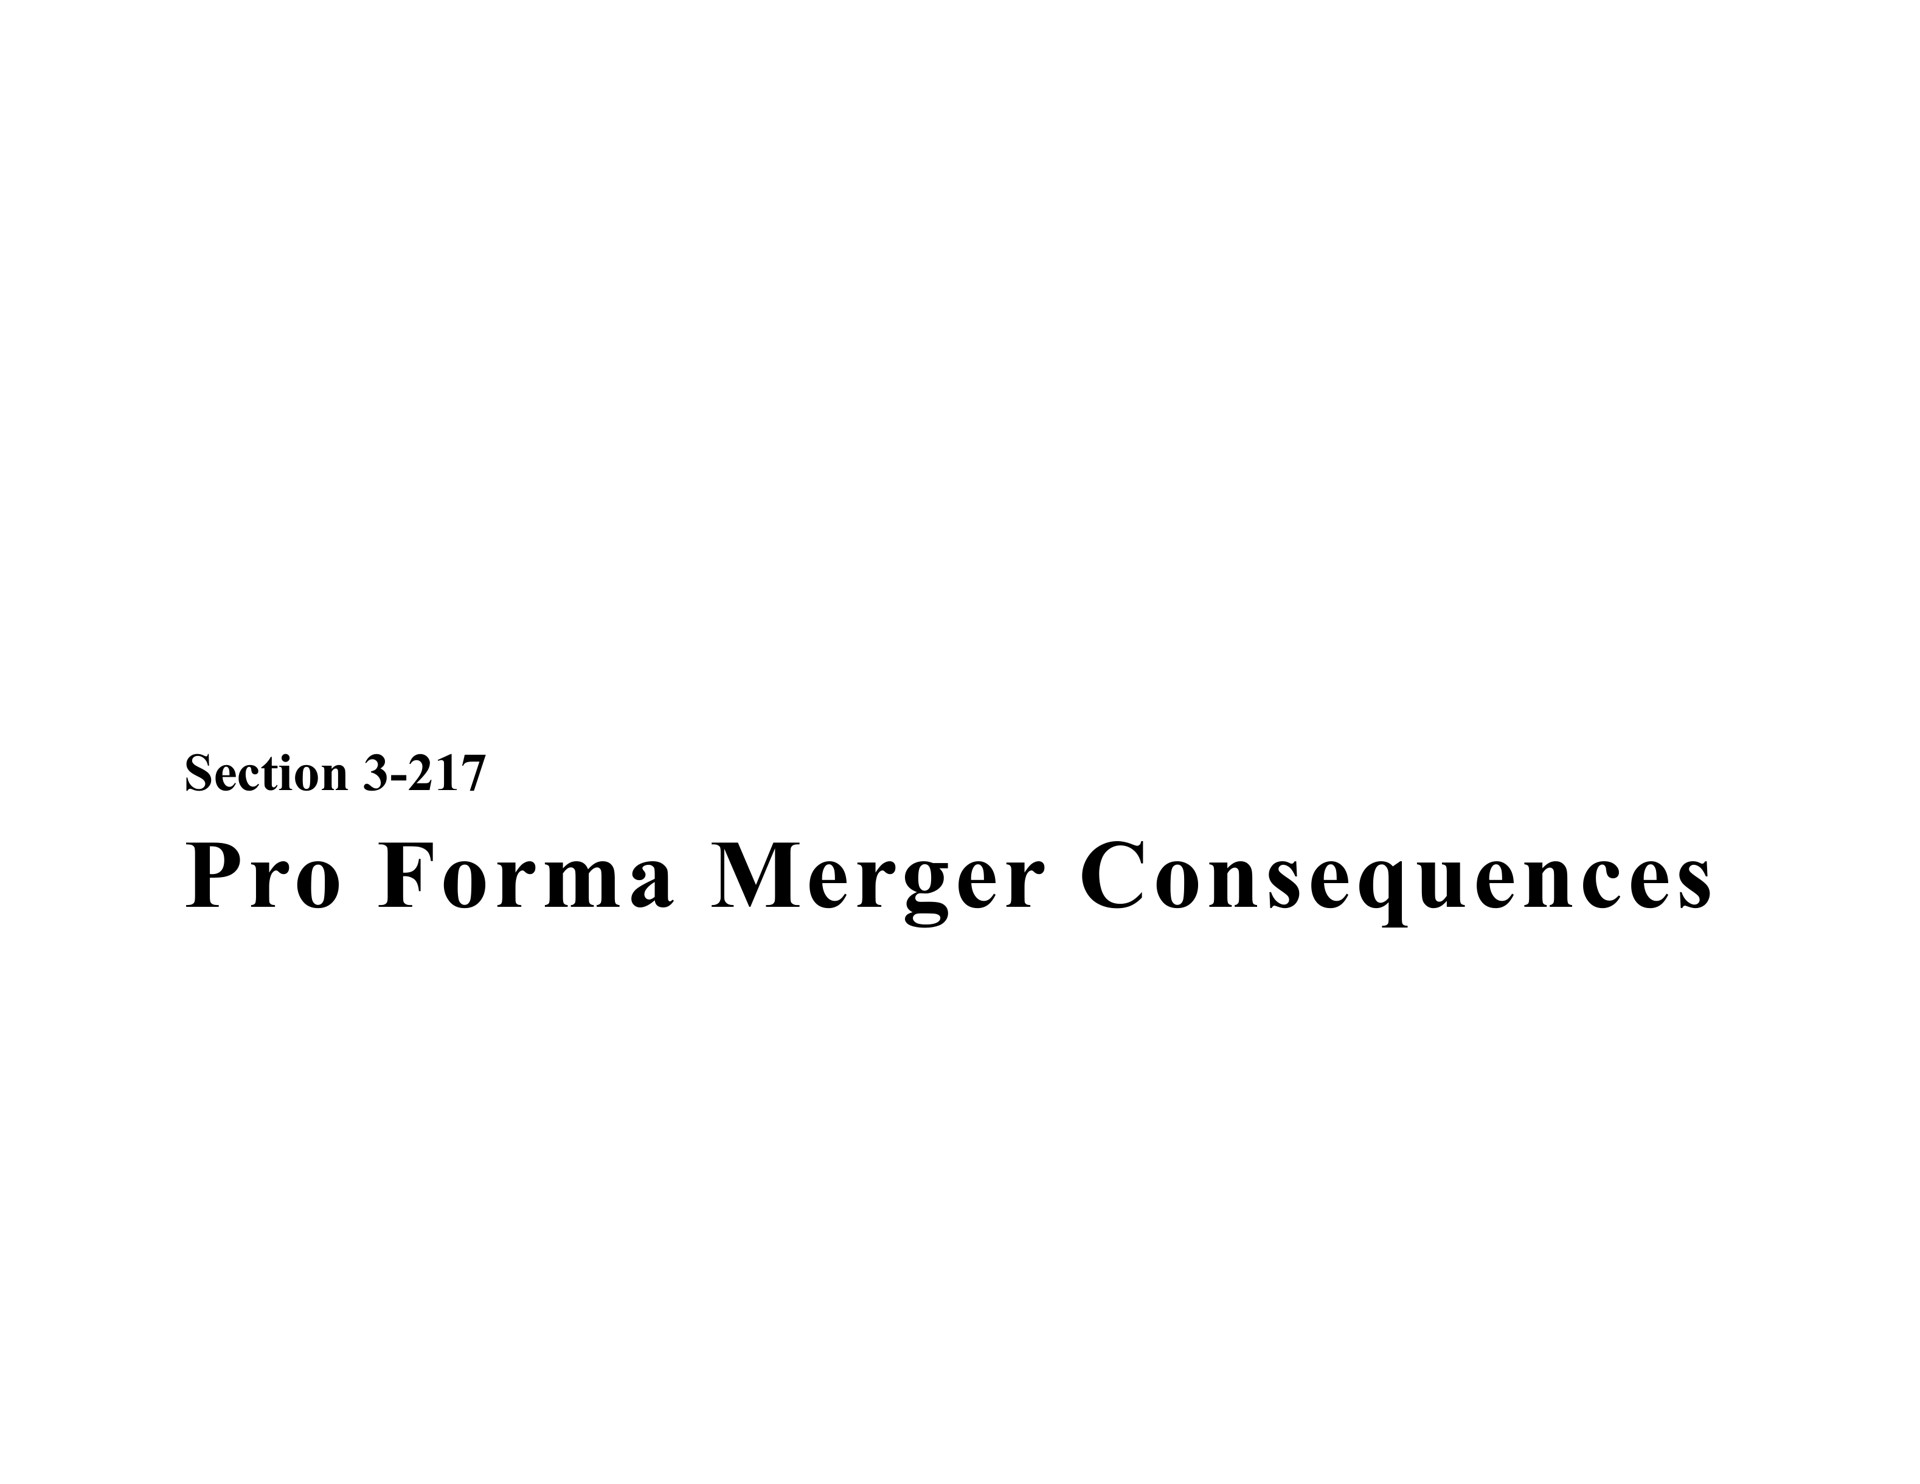 section pro merger consequences | Bear Stearns